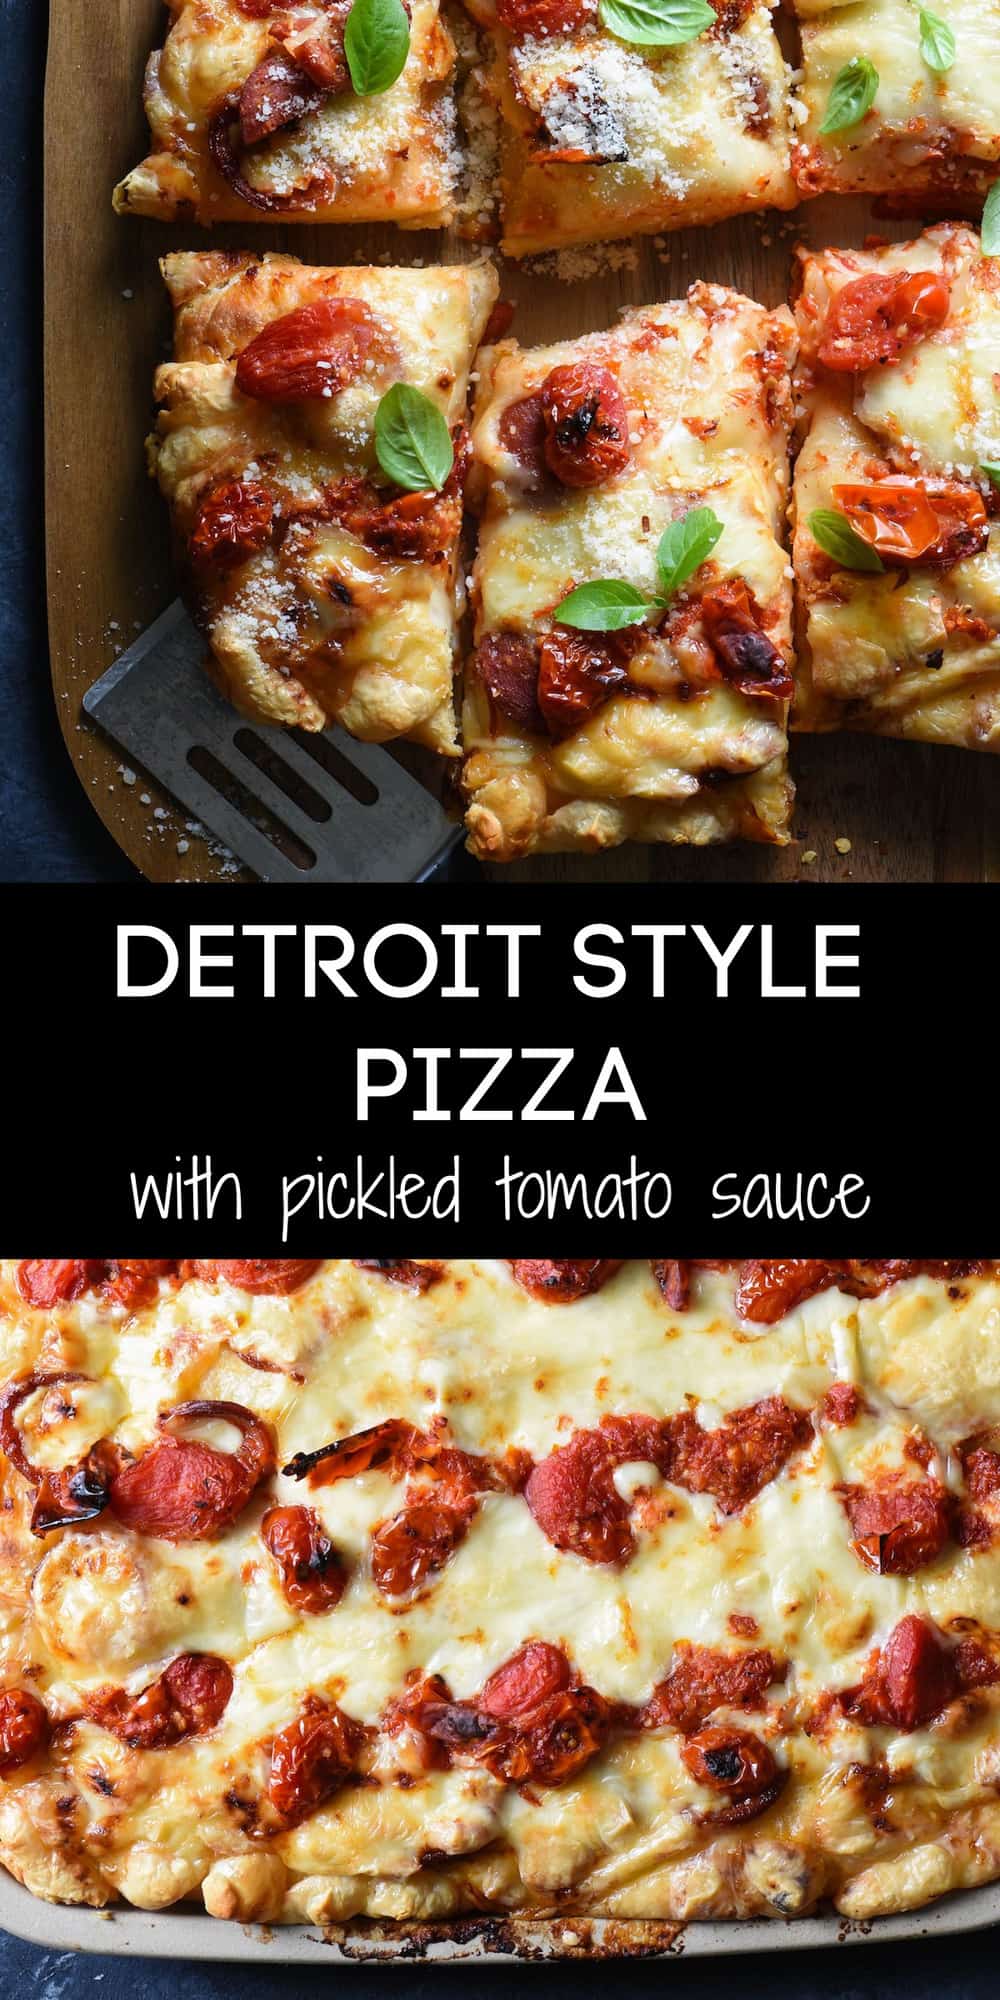 Collage of images of deep dish pizza with overlay: DETROIT STYLE PIZZA with pickled tomato sauce